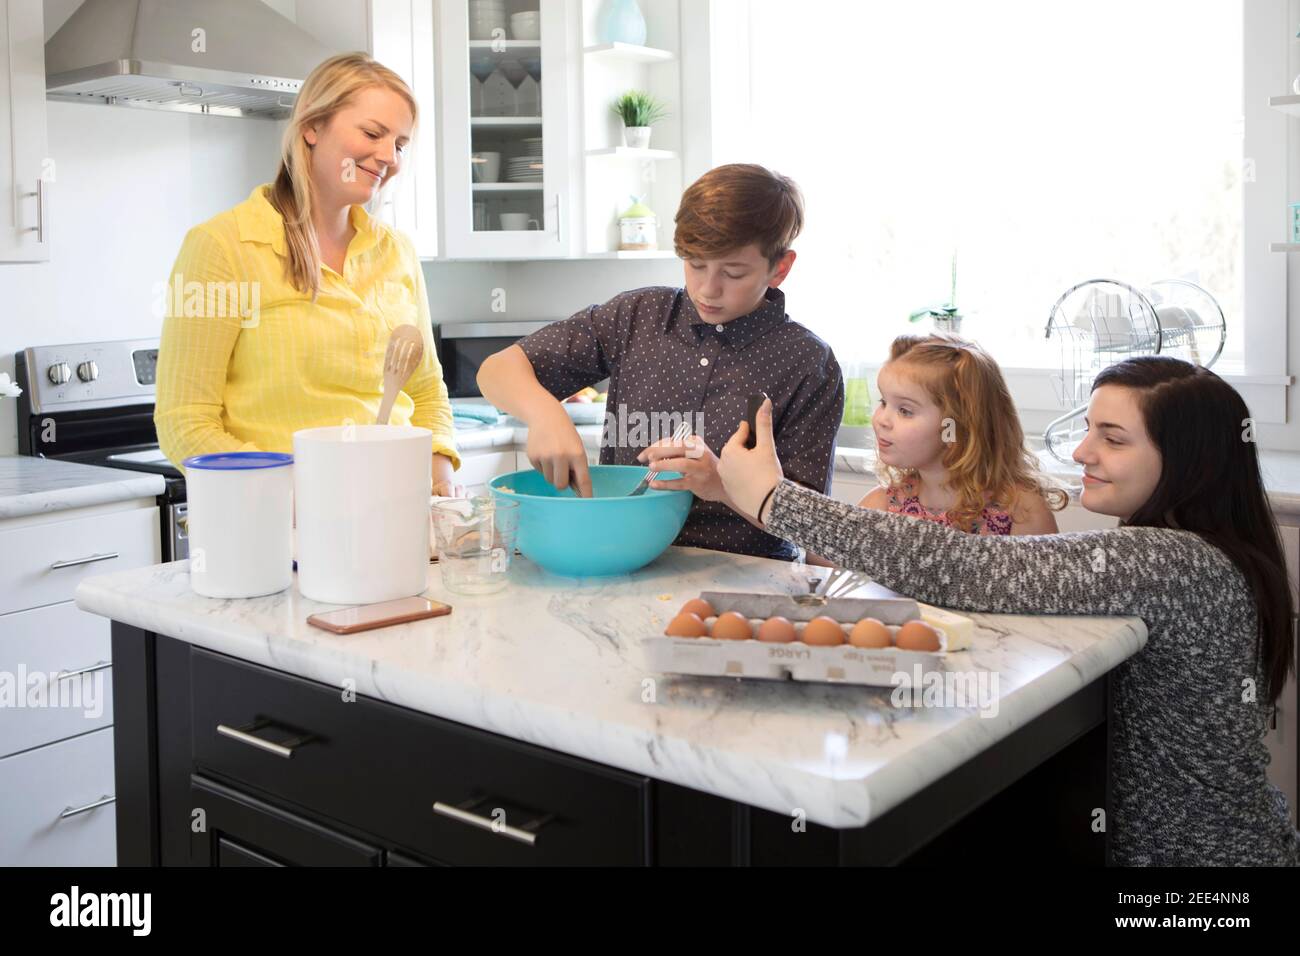 A family baking together as the daughter takes a selfie. Stock Photo